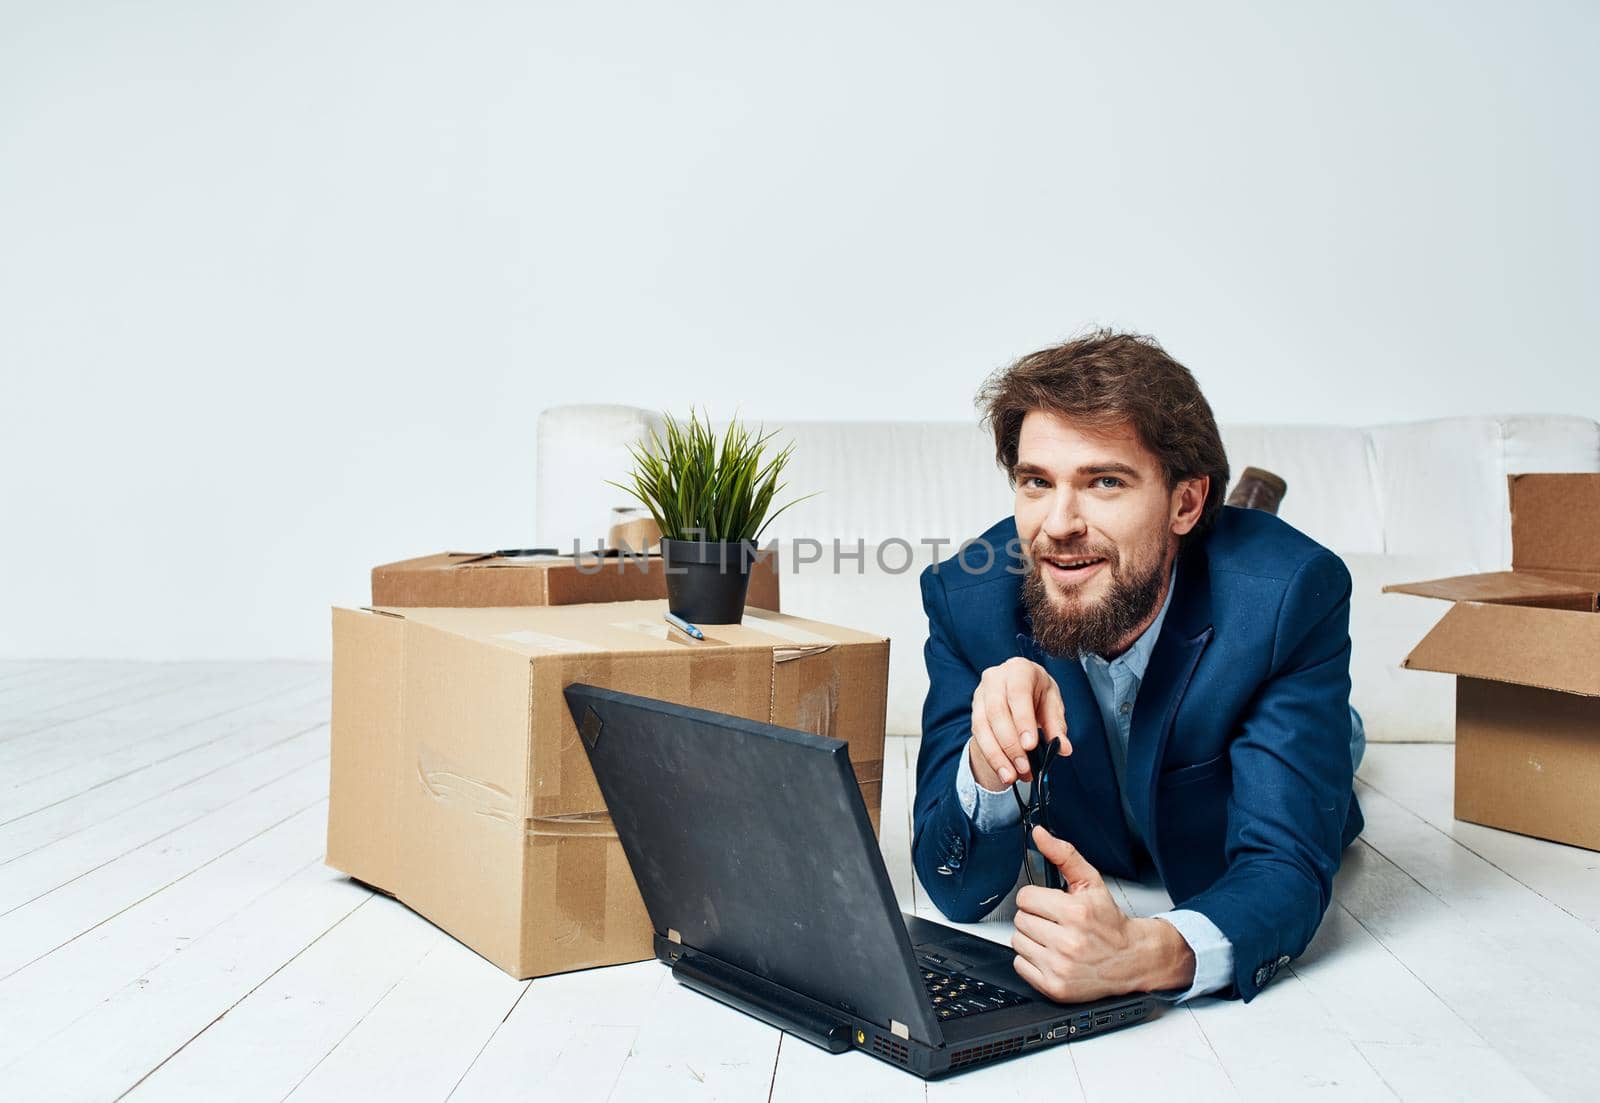 A man lies in front of a laptop boxes with things unpacking Office professional businessman. High quality photo